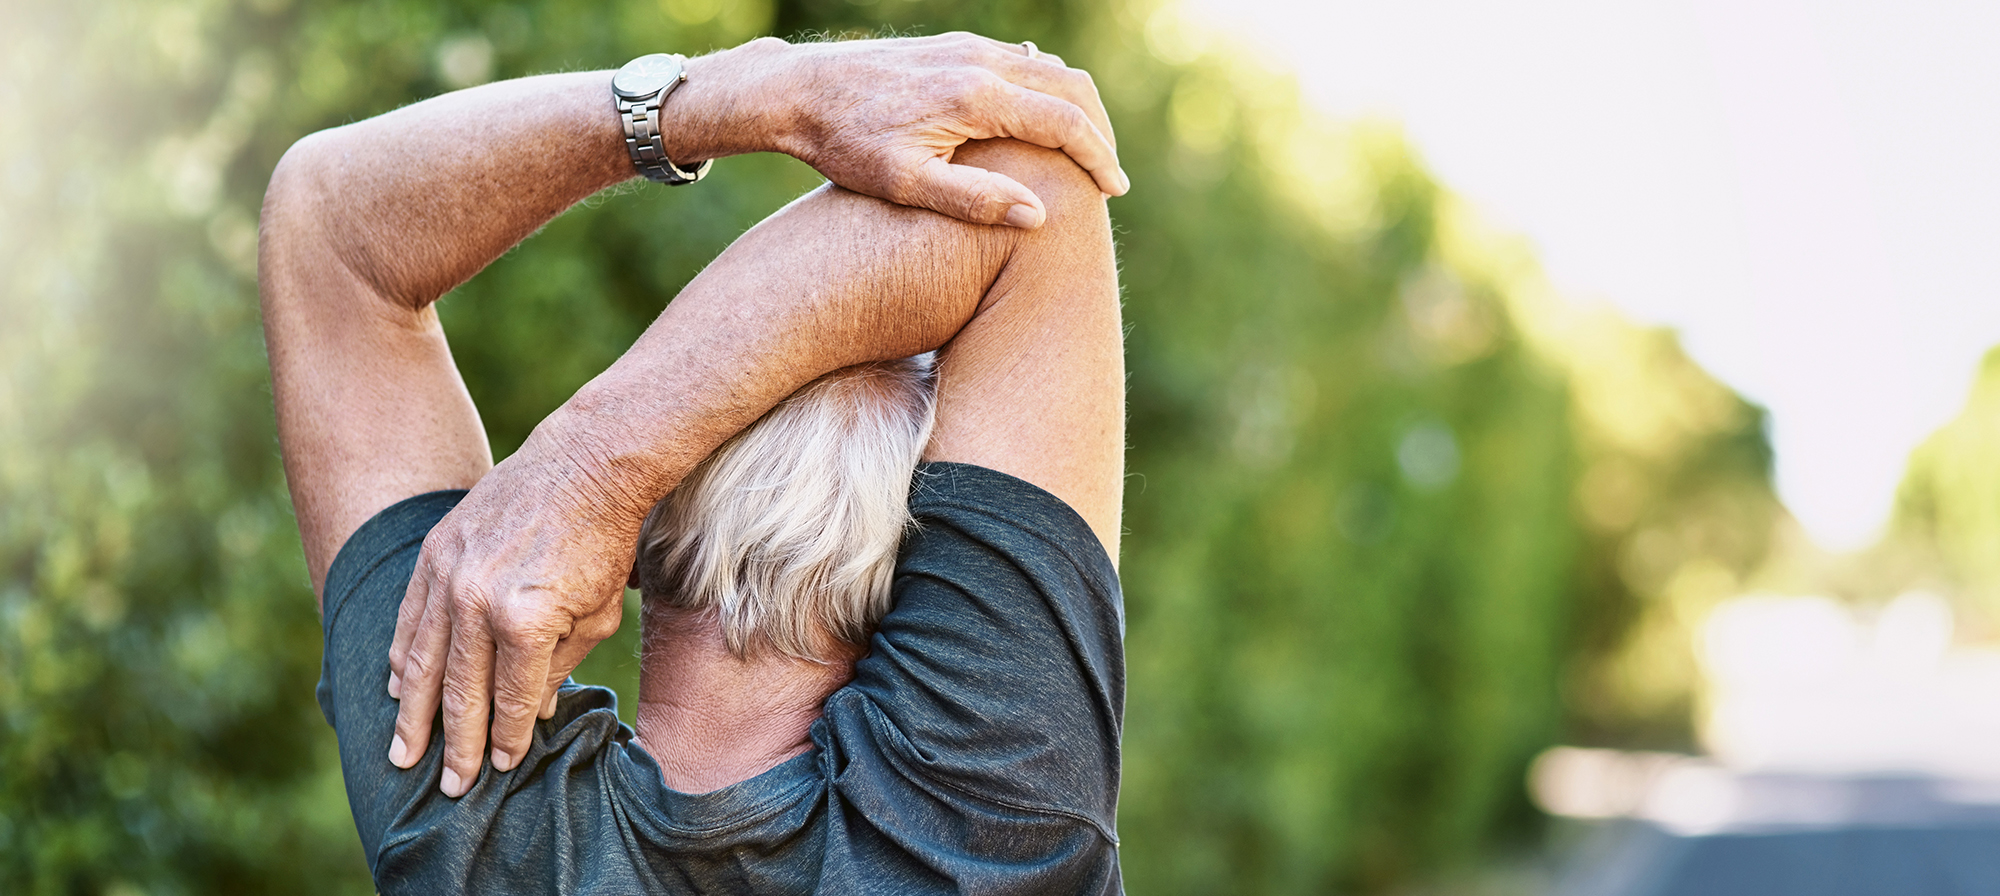 Incorporate Safe Stretching to Move More Freely as You Age